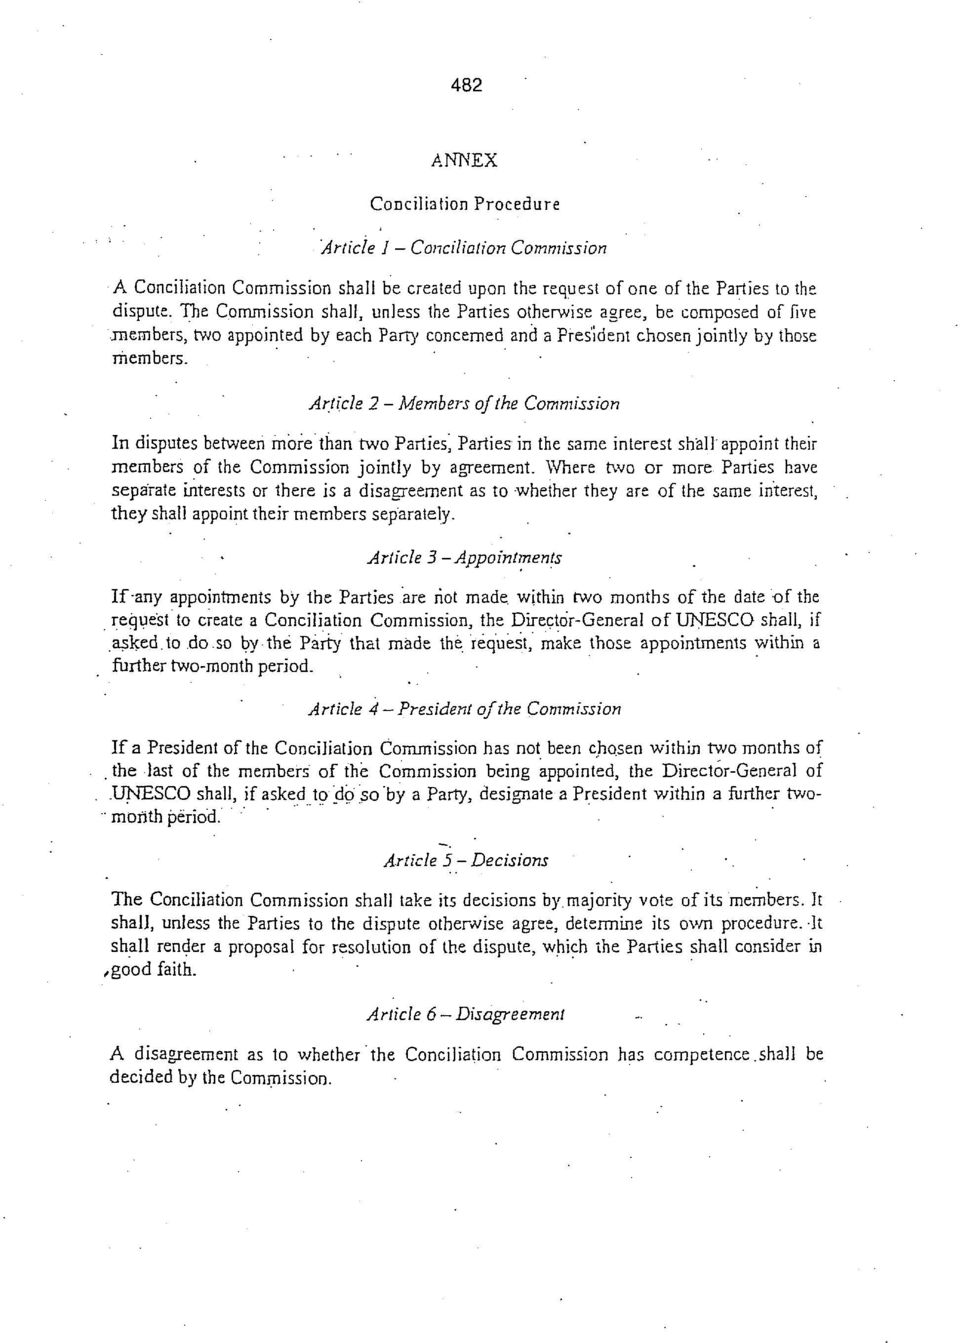 Article 2 - Members of the Commission In disputes between more than two Parties, Parties in the same interest shall appoint their members of the Commission jointly by agreement.